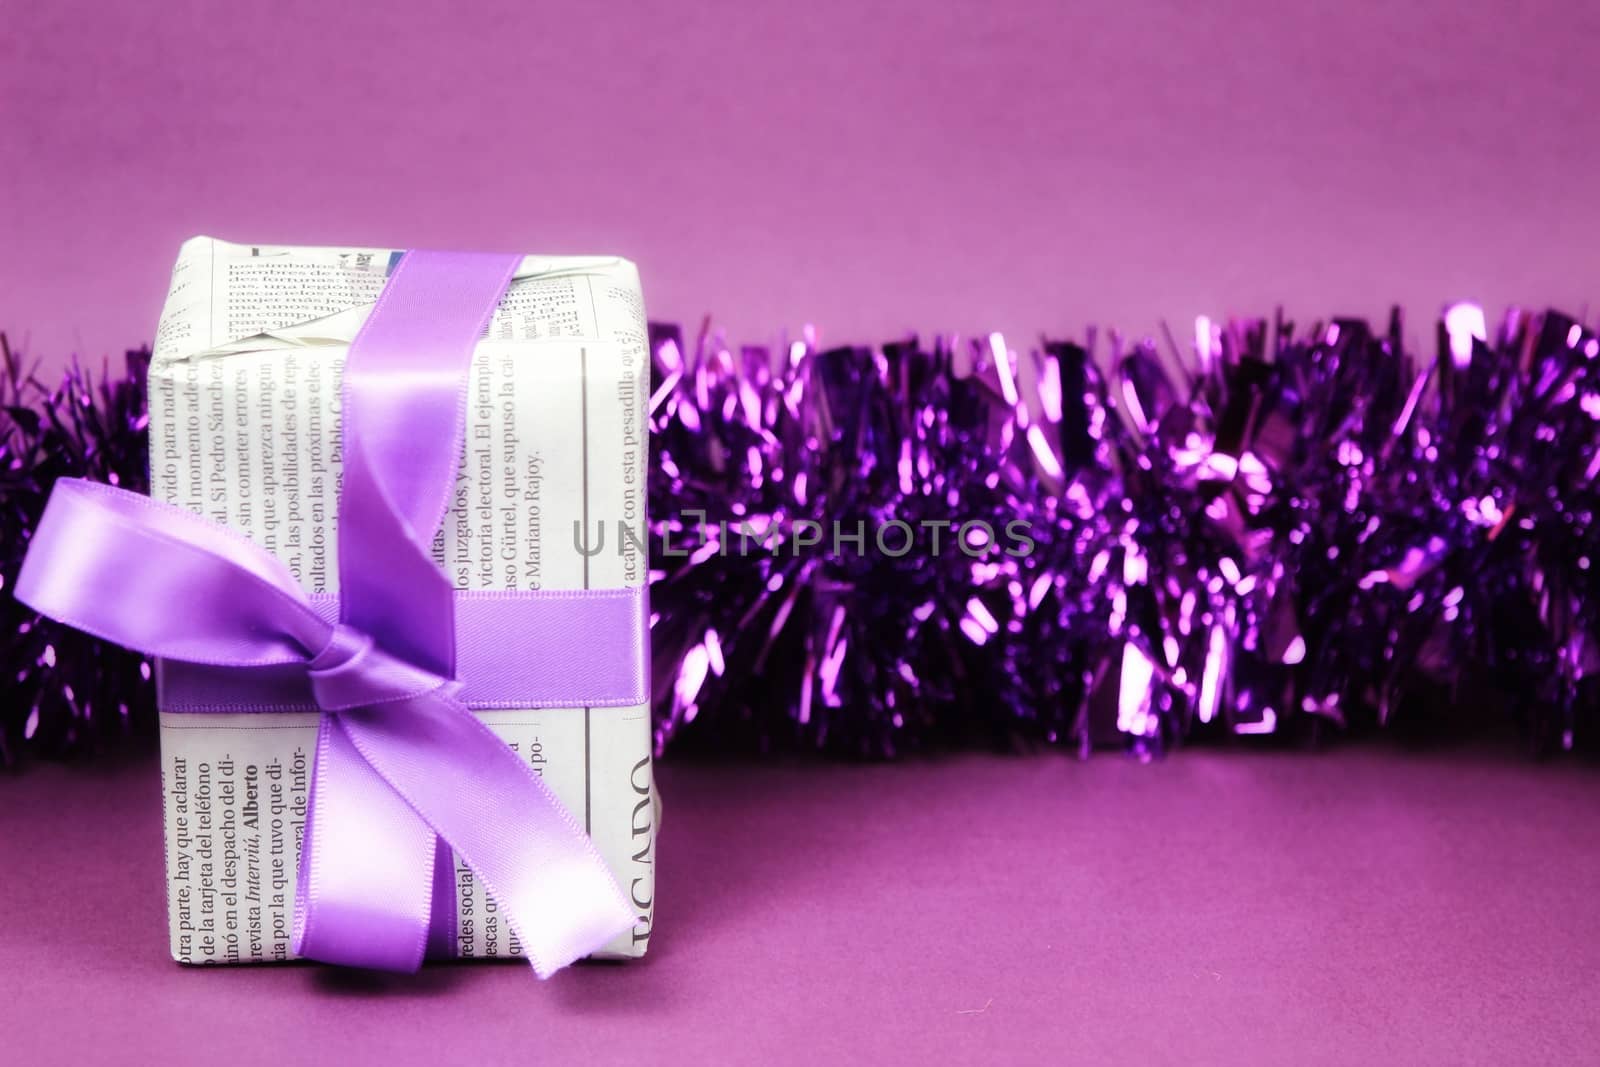 Gifts wrapped in old newspaper on purple background by soniabonet